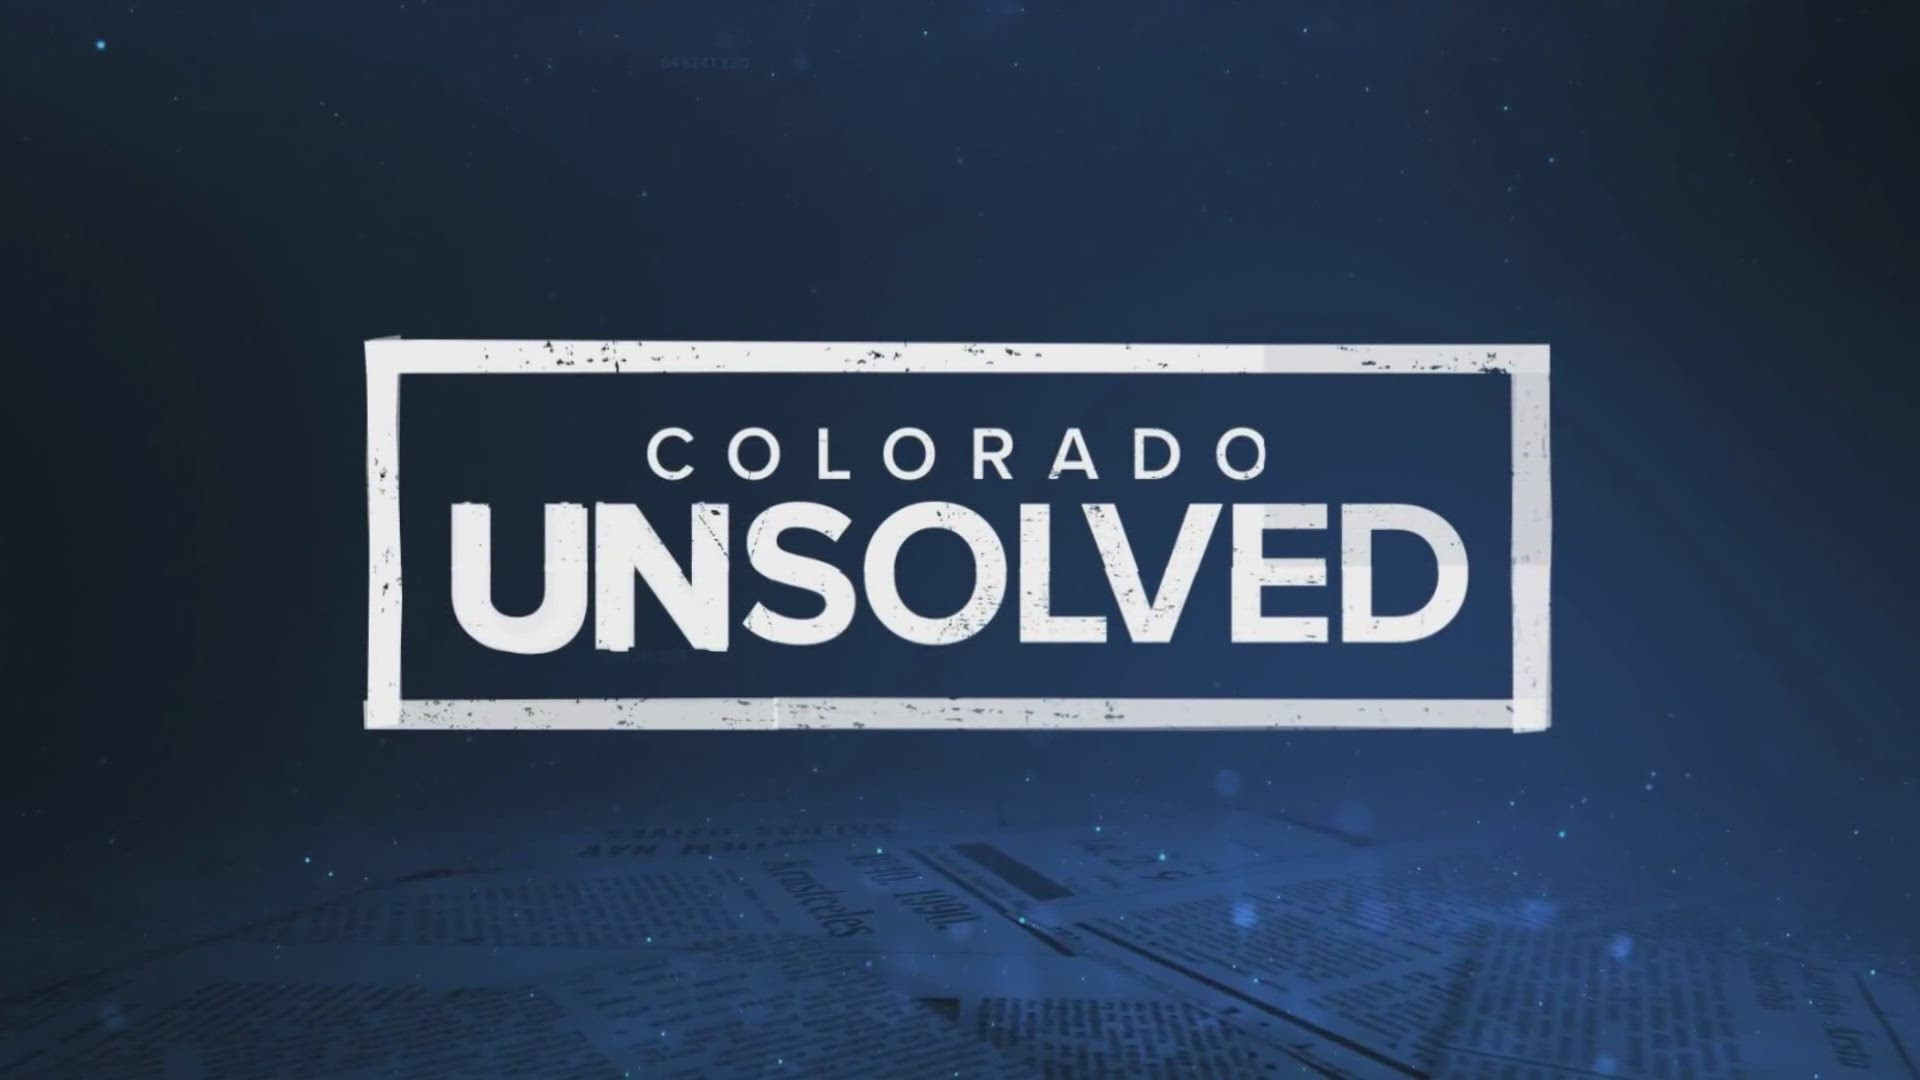 We look at some of Colorado’s cold cases as families still wait for some type of closure and justice.